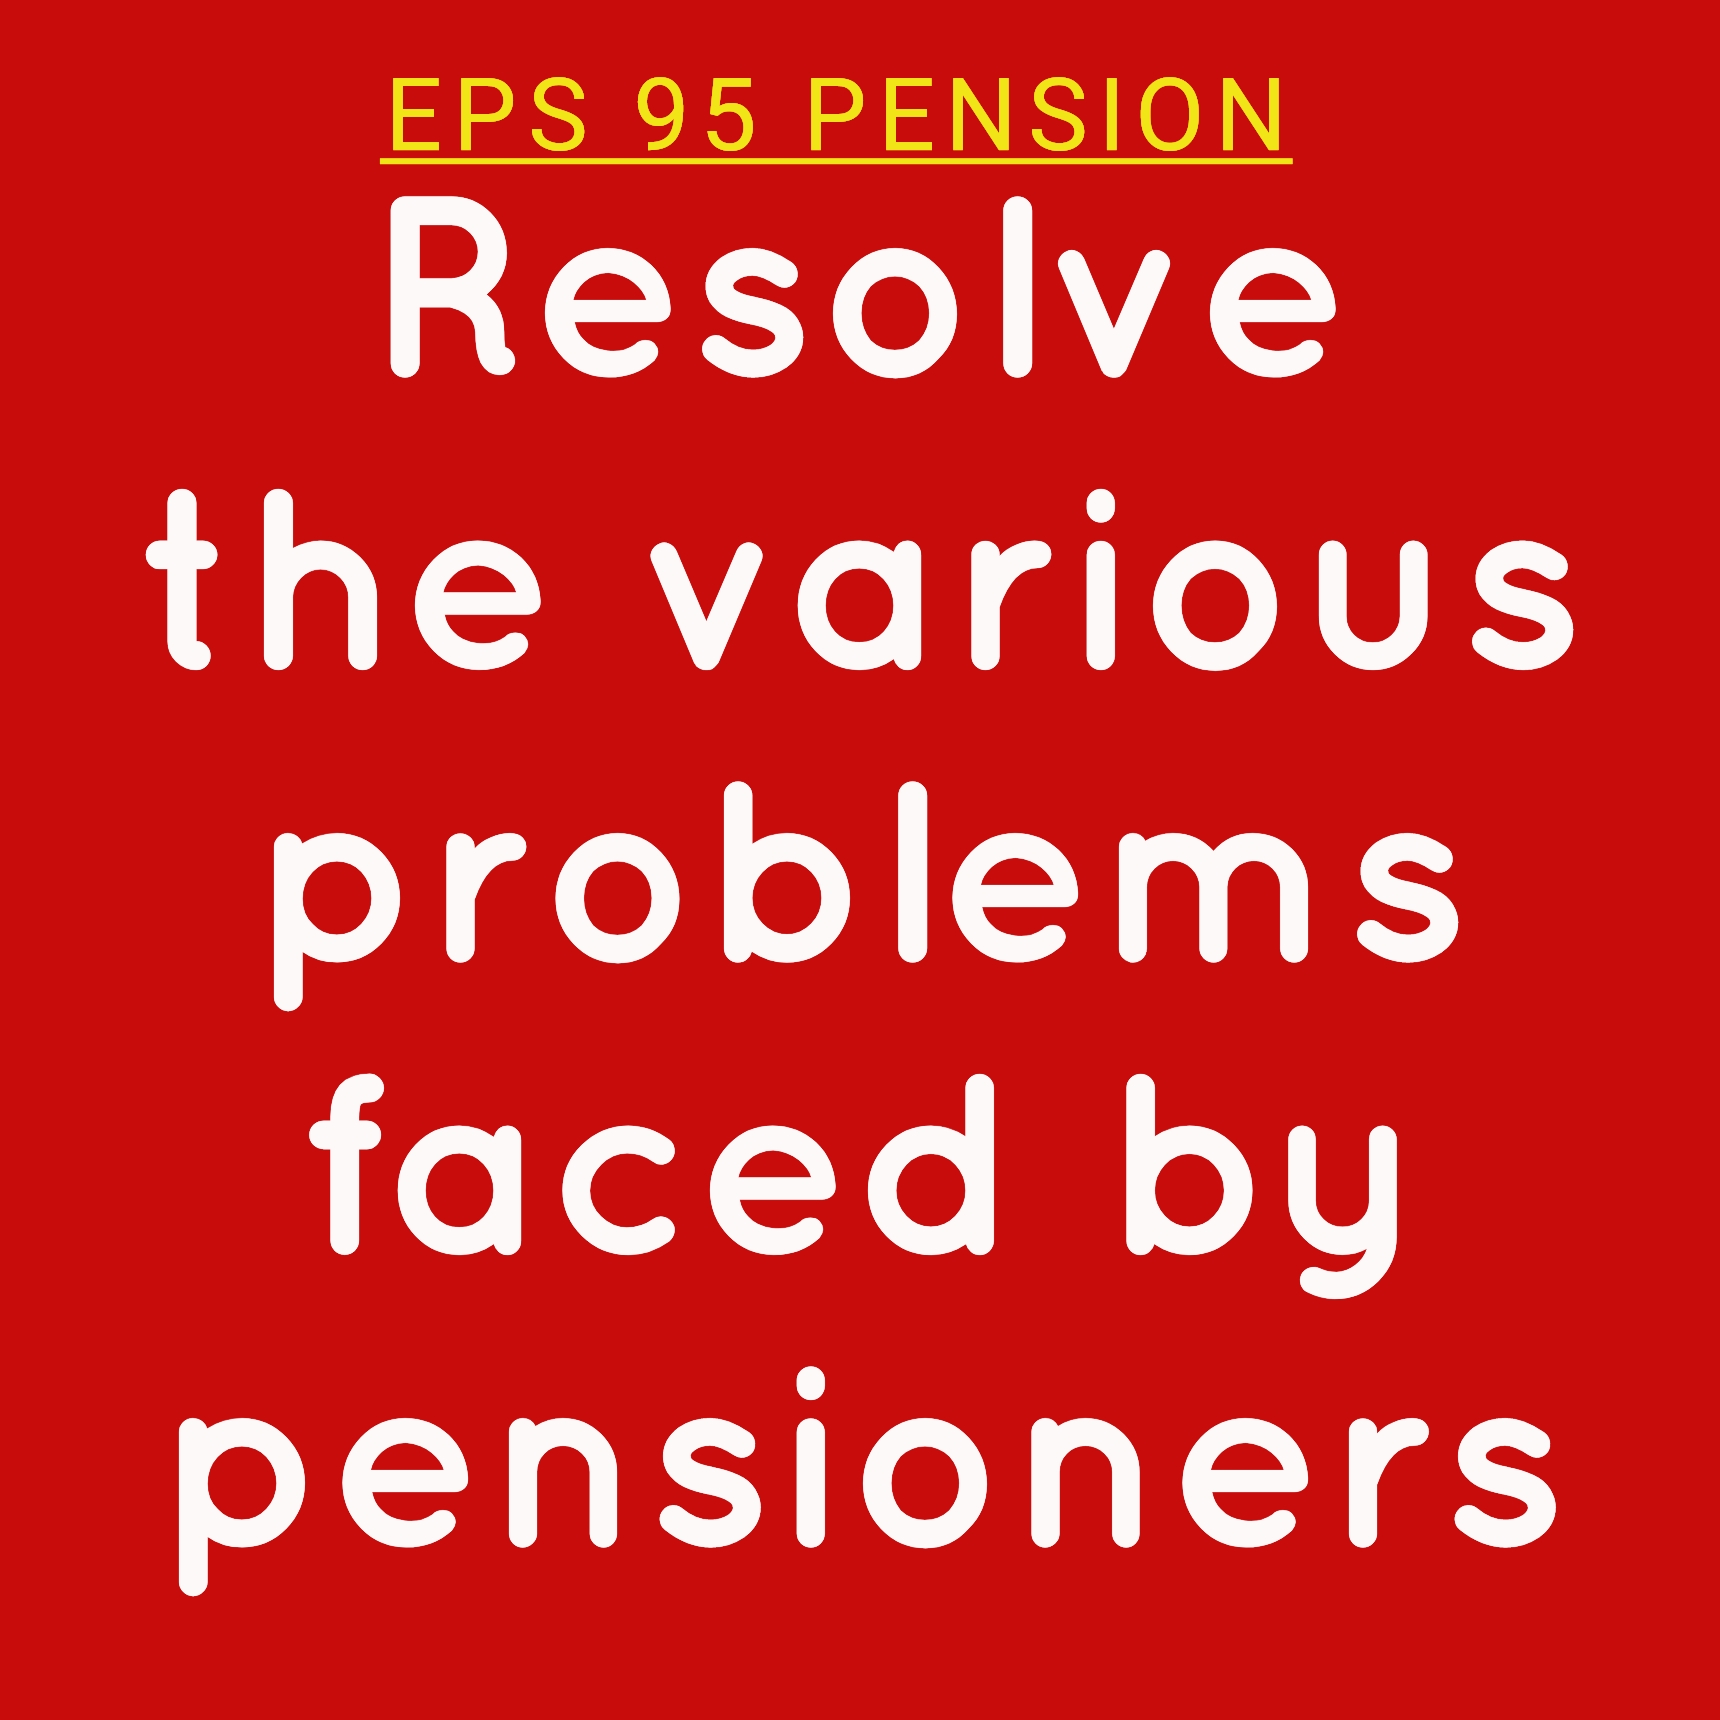 Resolve the various problems faced by pensioners